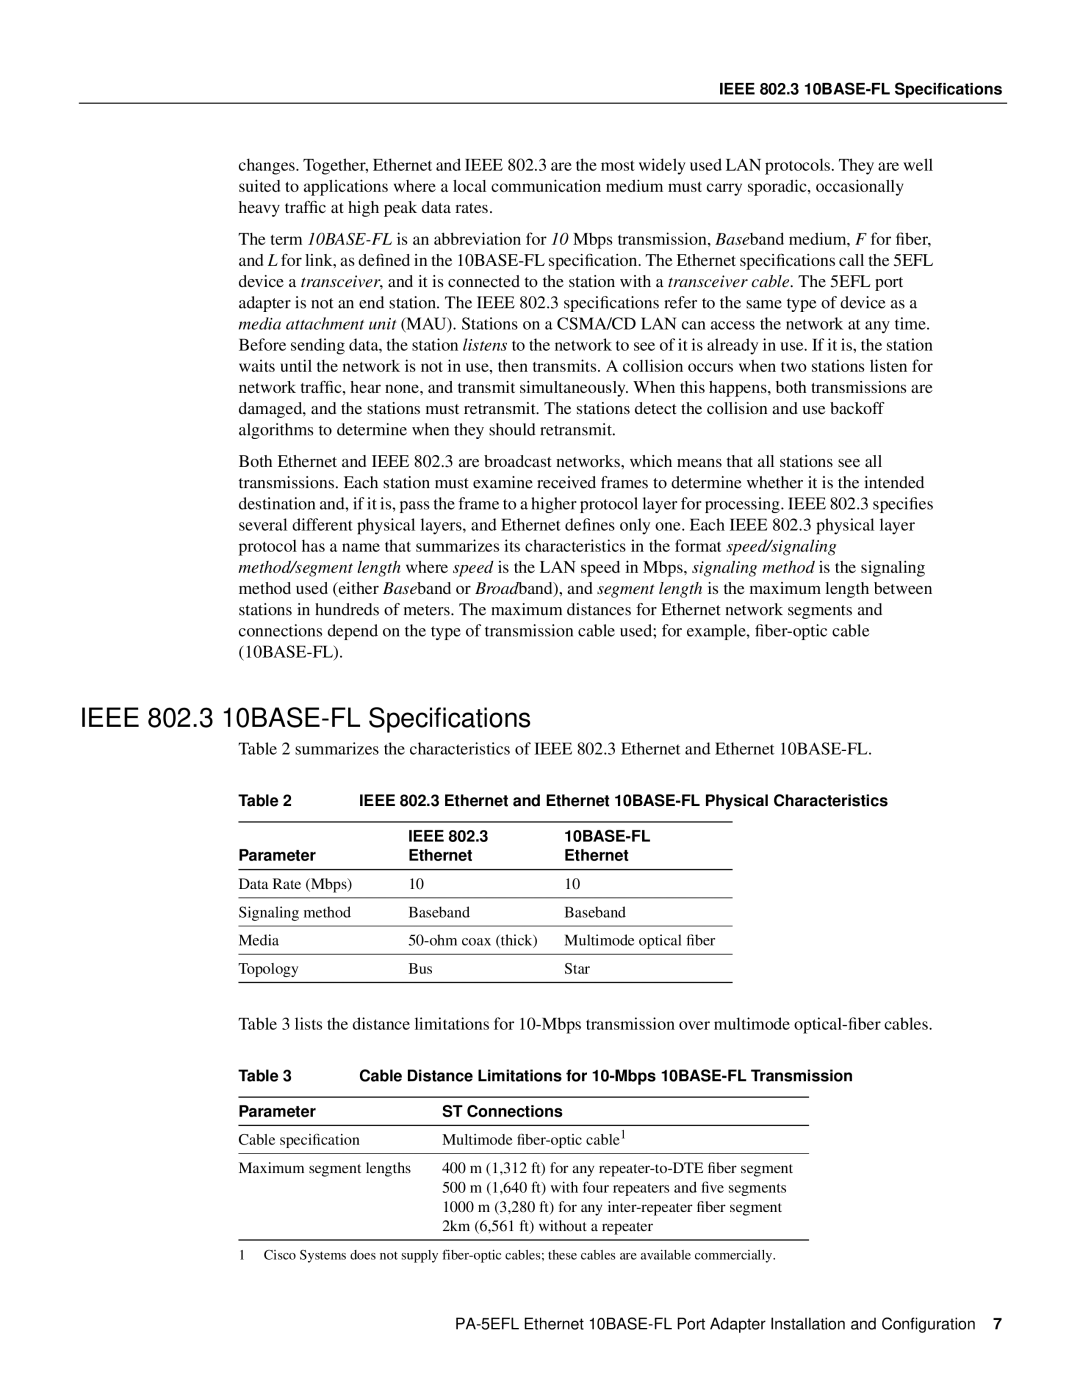 Cisco Systems PA-5EFL= manual IEEE 802.3 10BASE-FL Speciﬁcations 